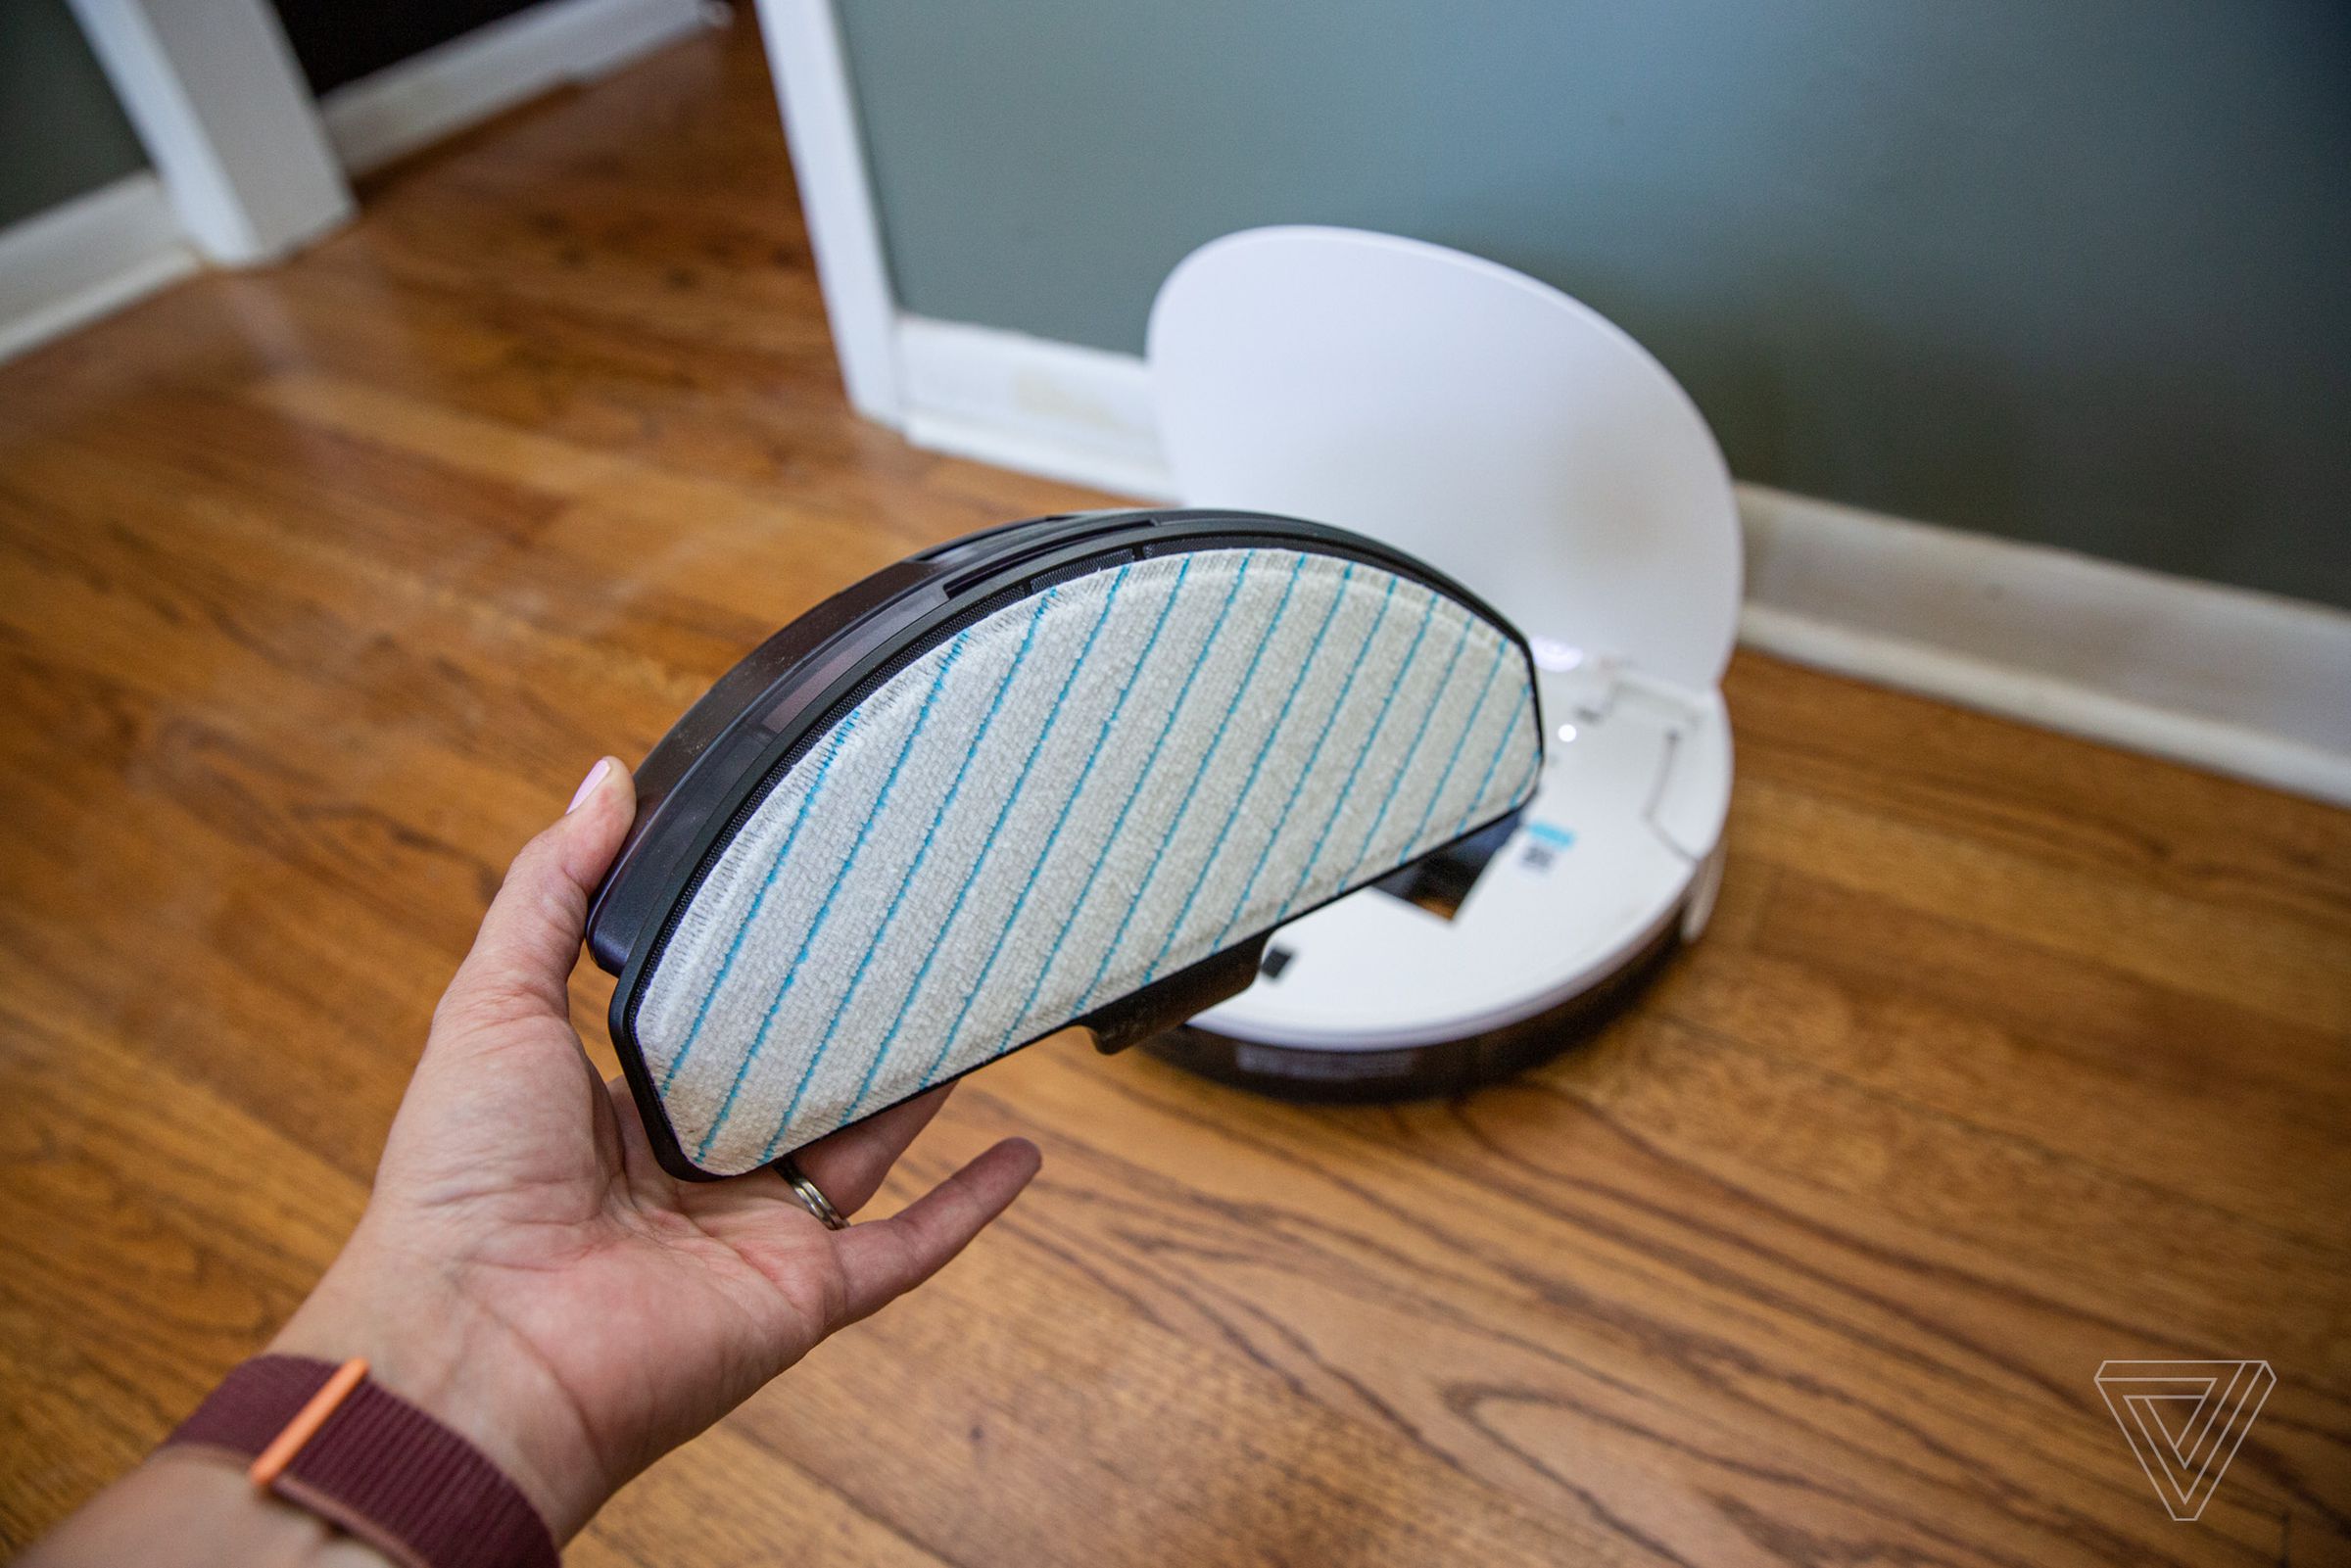 The Yeedi’s water tank holds a minimal 180mL, and its mopping pad is paper-thin. 